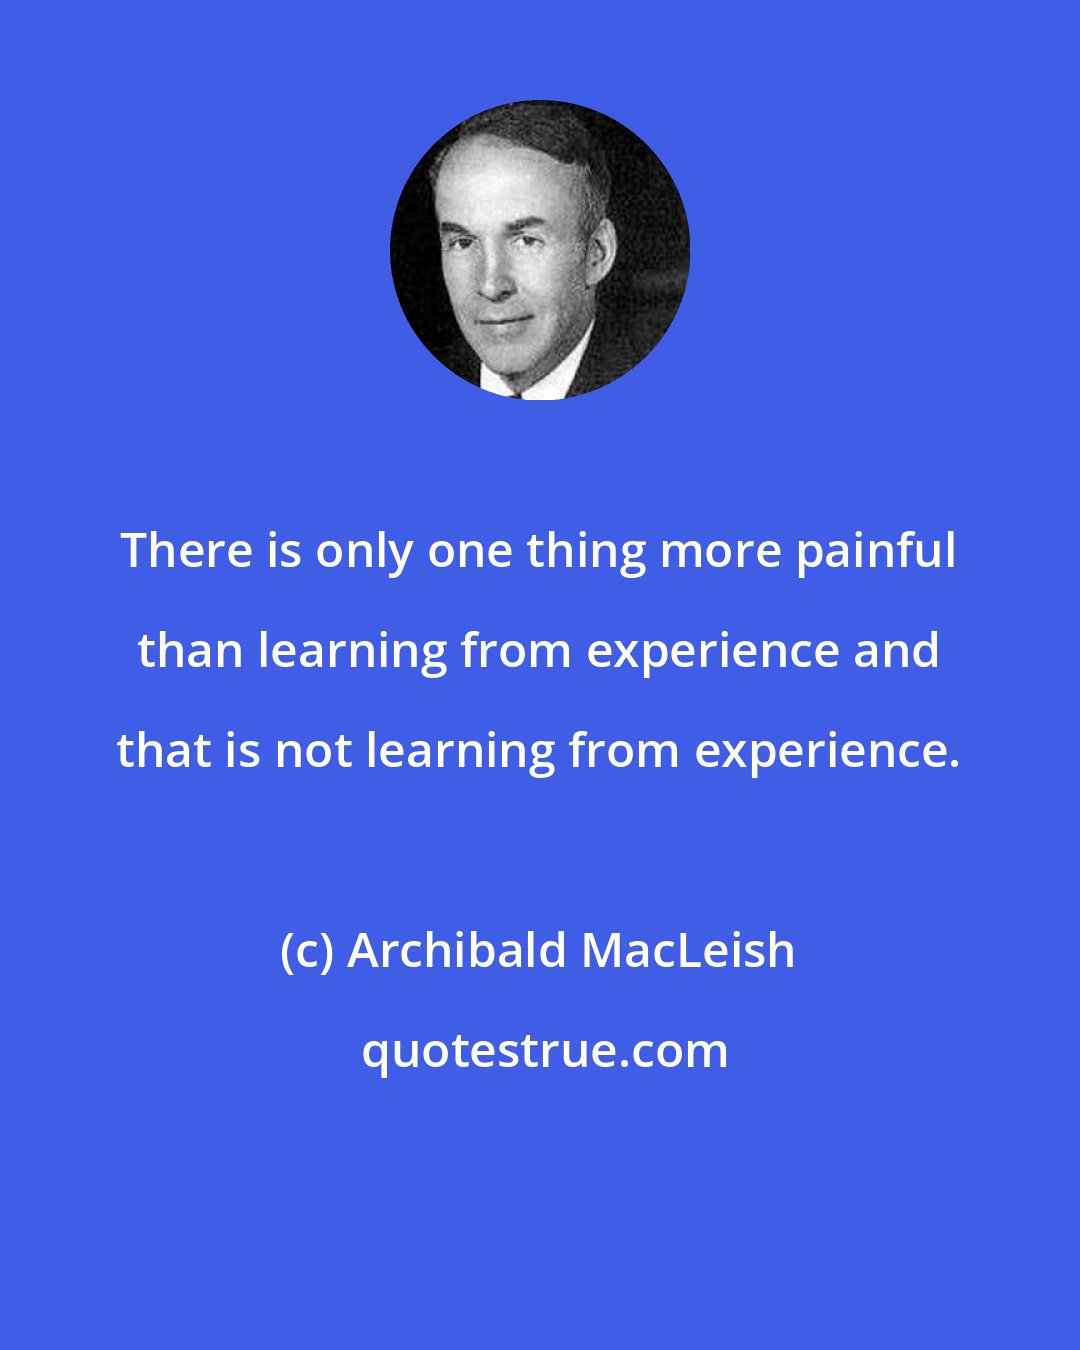 Archibald MacLeish: There is only one thing more painful than learning from experience and that is not learning from experience.